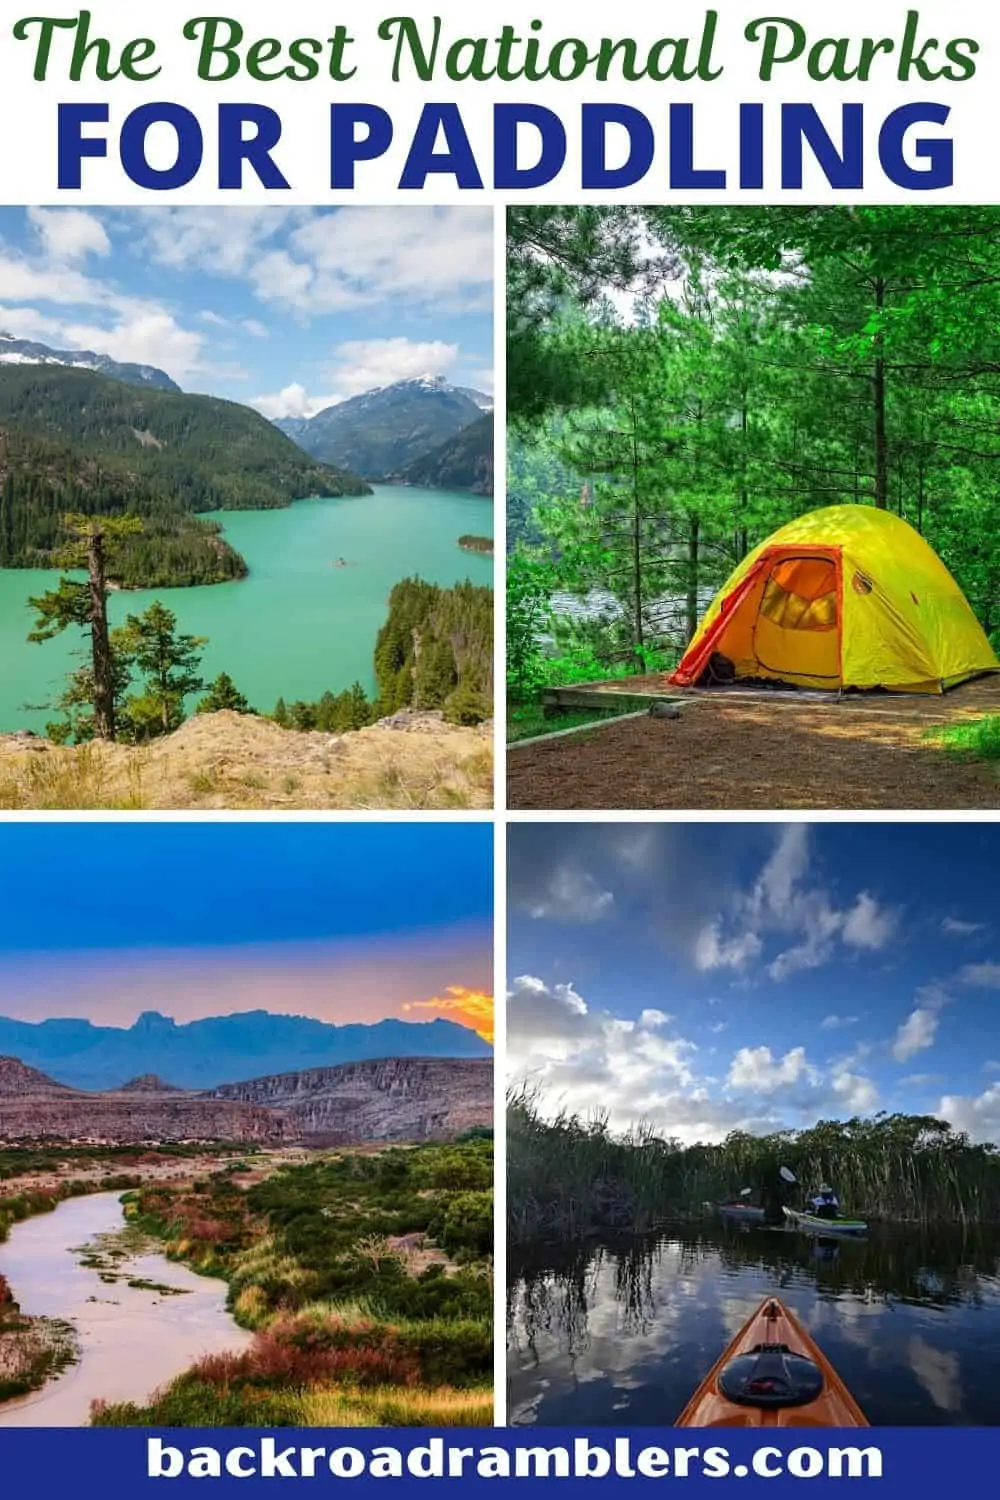 A collage of photos featuring national parks. Text overlay: The Best National Parks for Paddling.